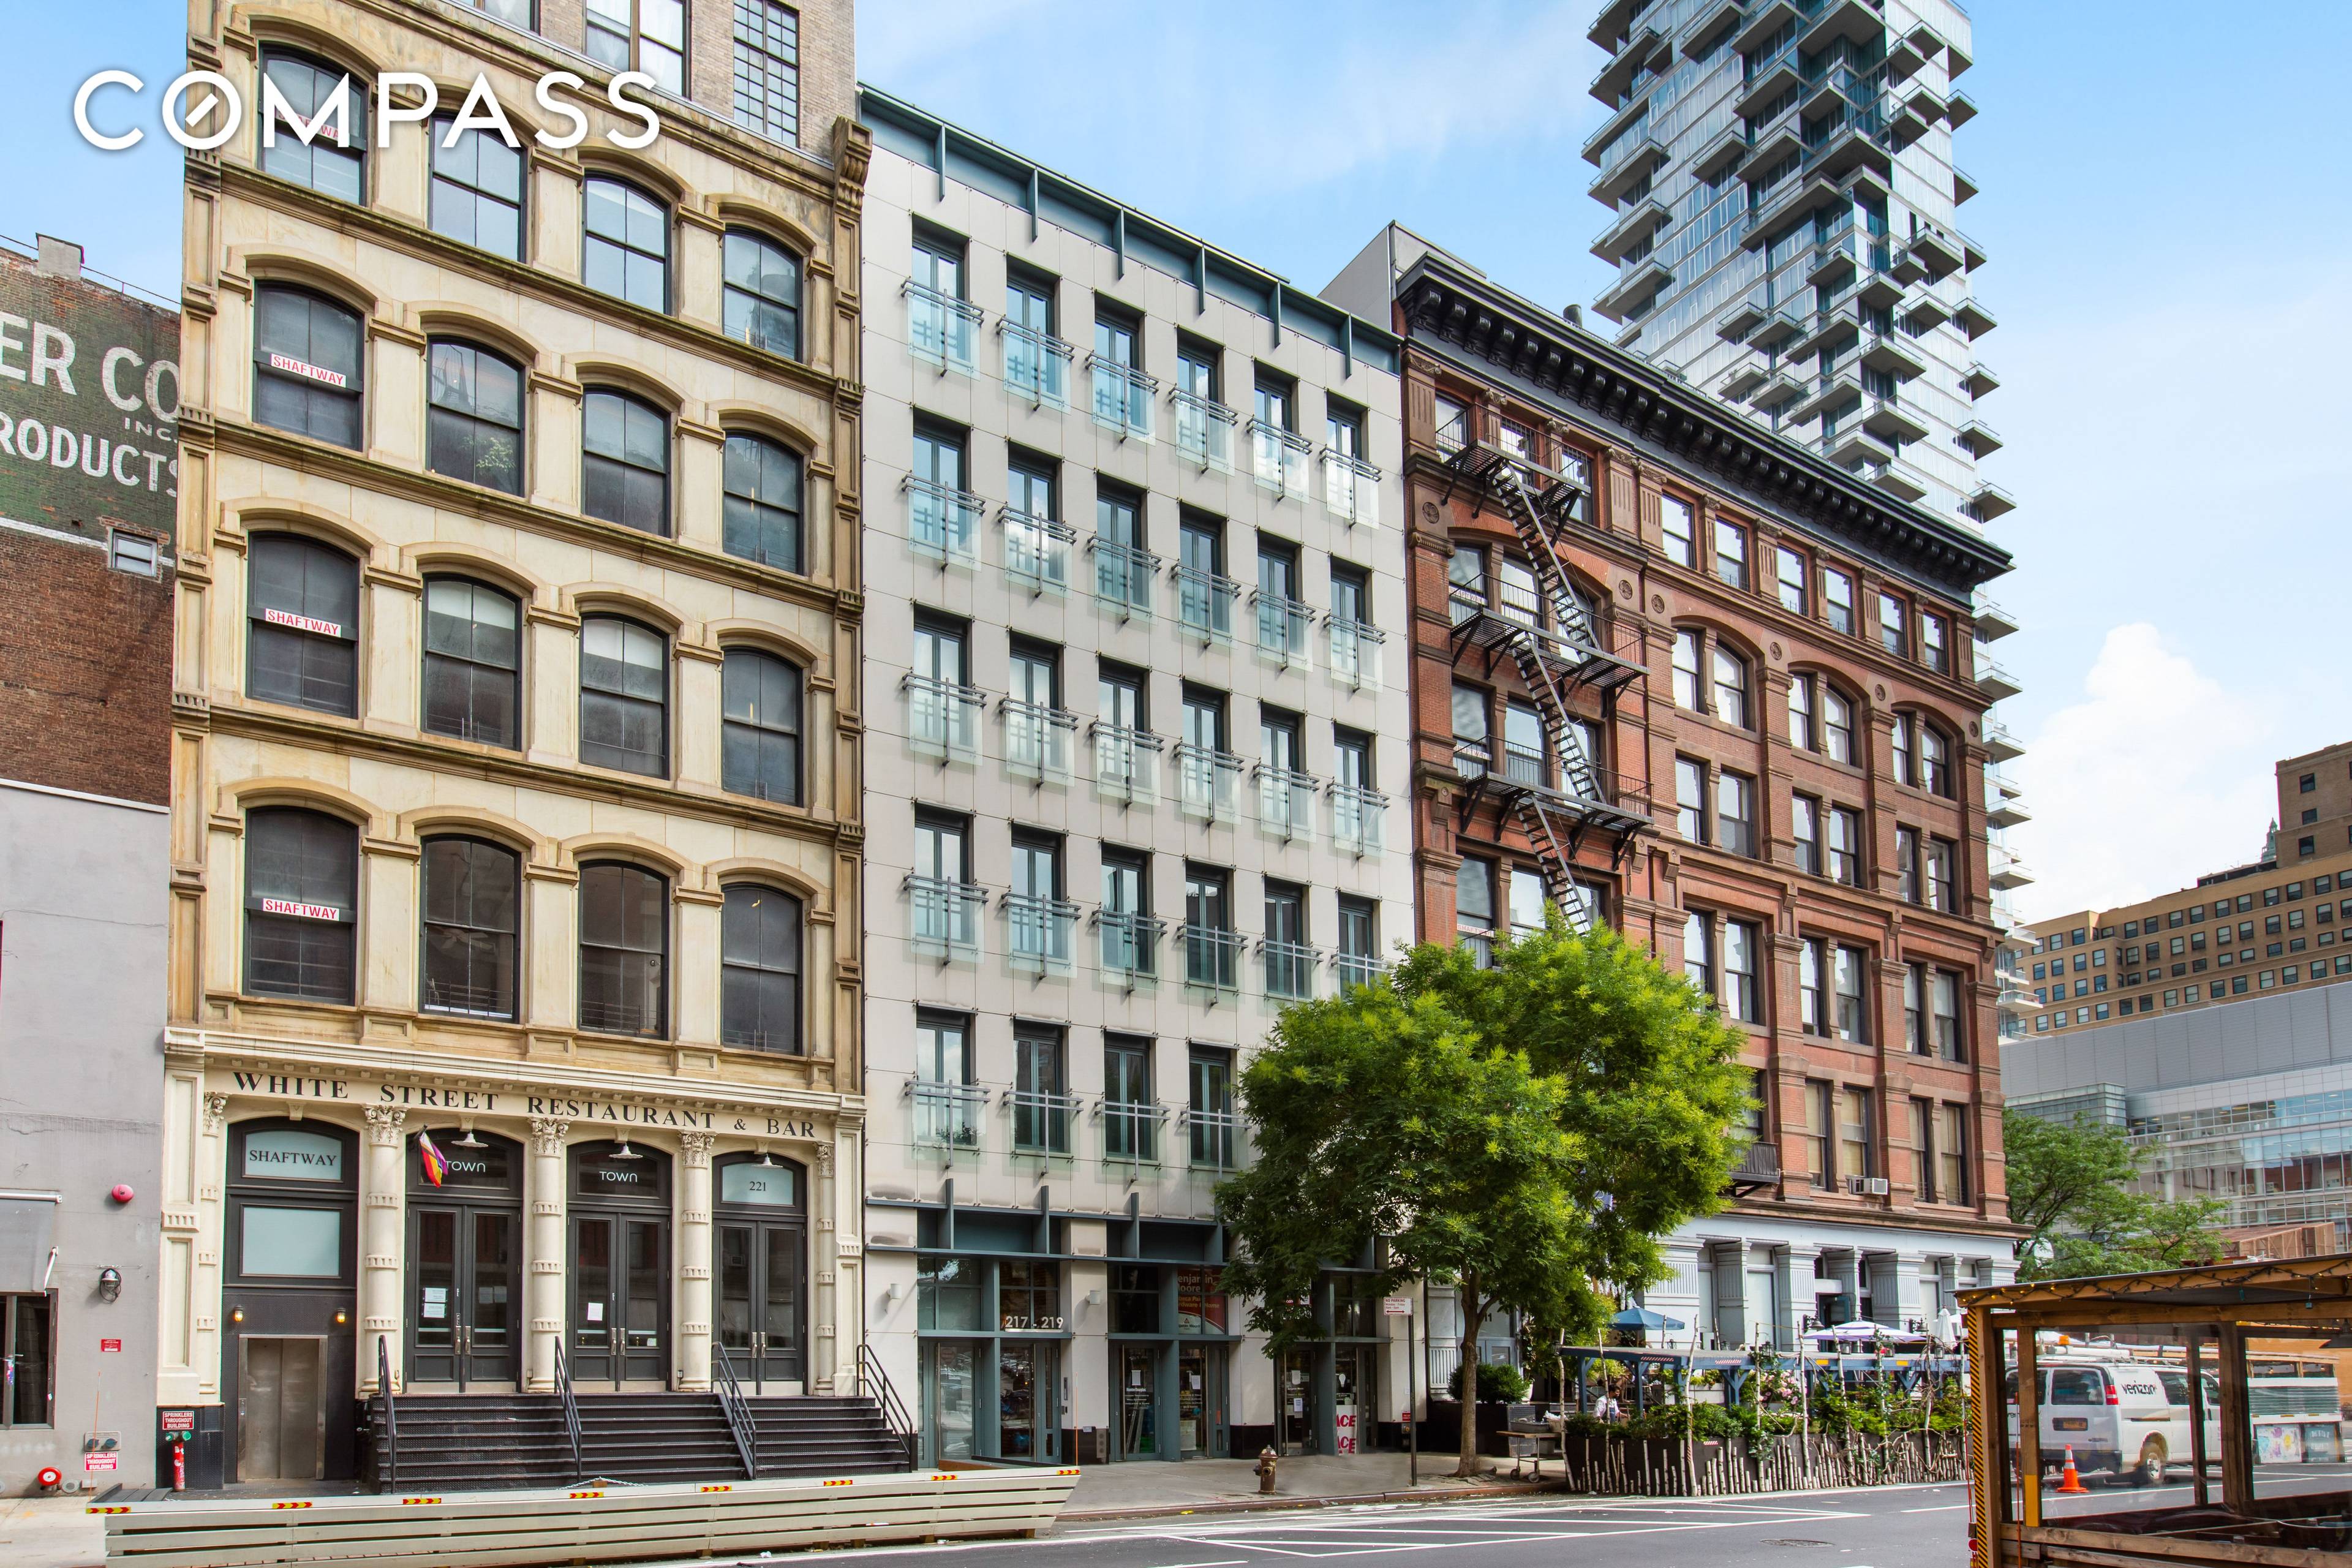 Extremely rare opportunity to purchase a turn key mixed use property in the heart of TriBeCa.